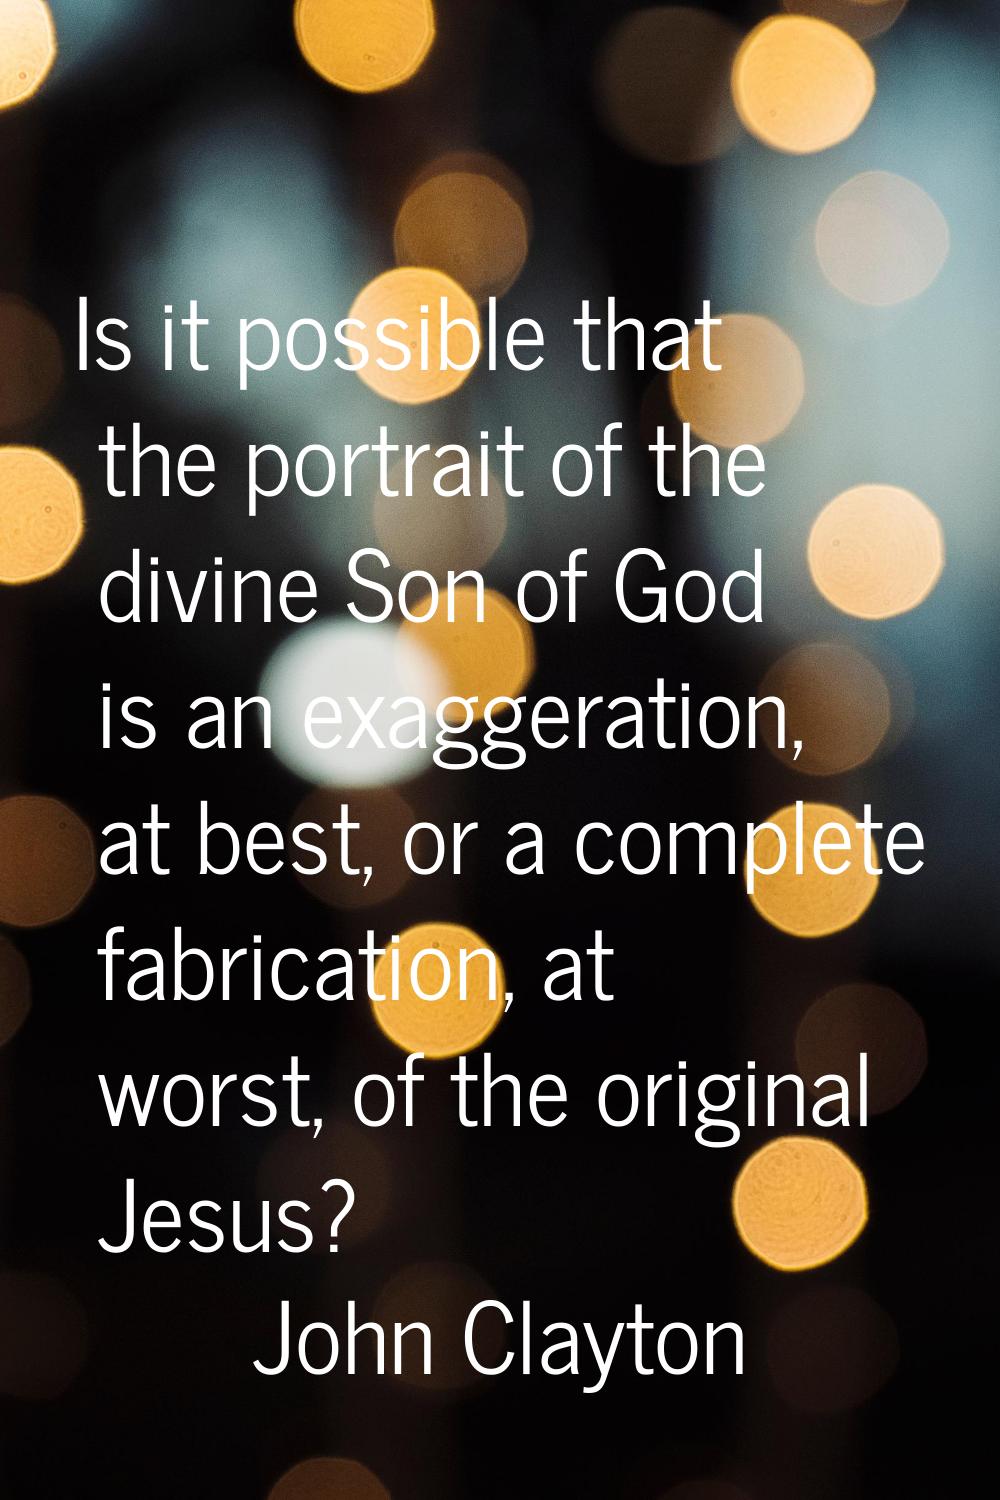 Is it possible that the portrait of the divine Son of God is an exaggeration, at best, or a complet